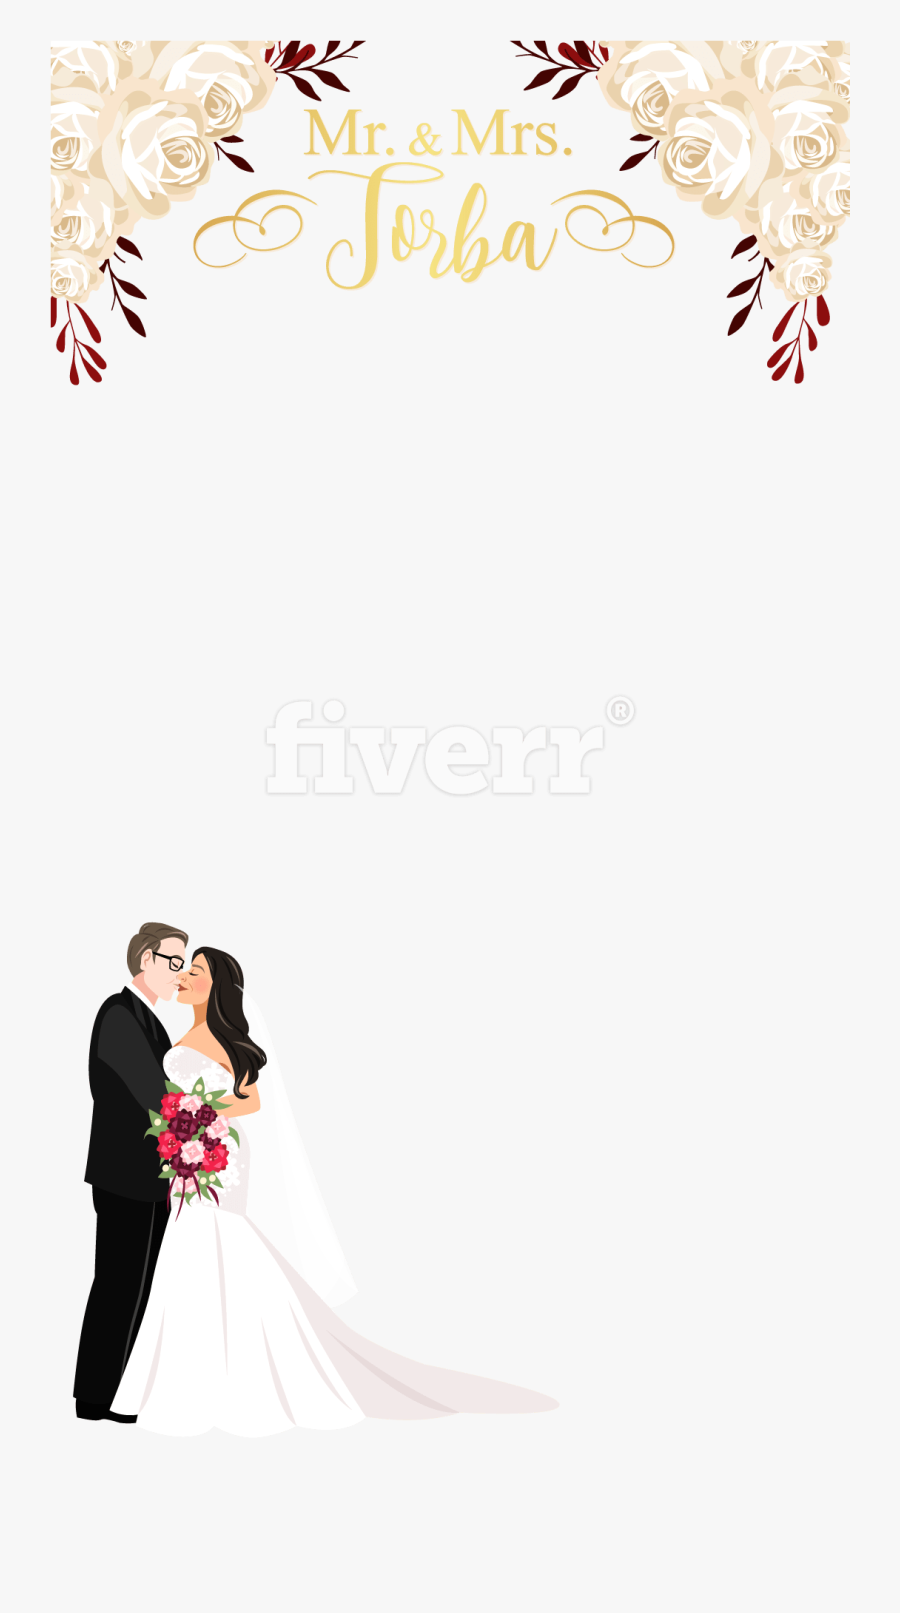 Wedding - Snapchat Marriage Filter Png, Transparent Clipart